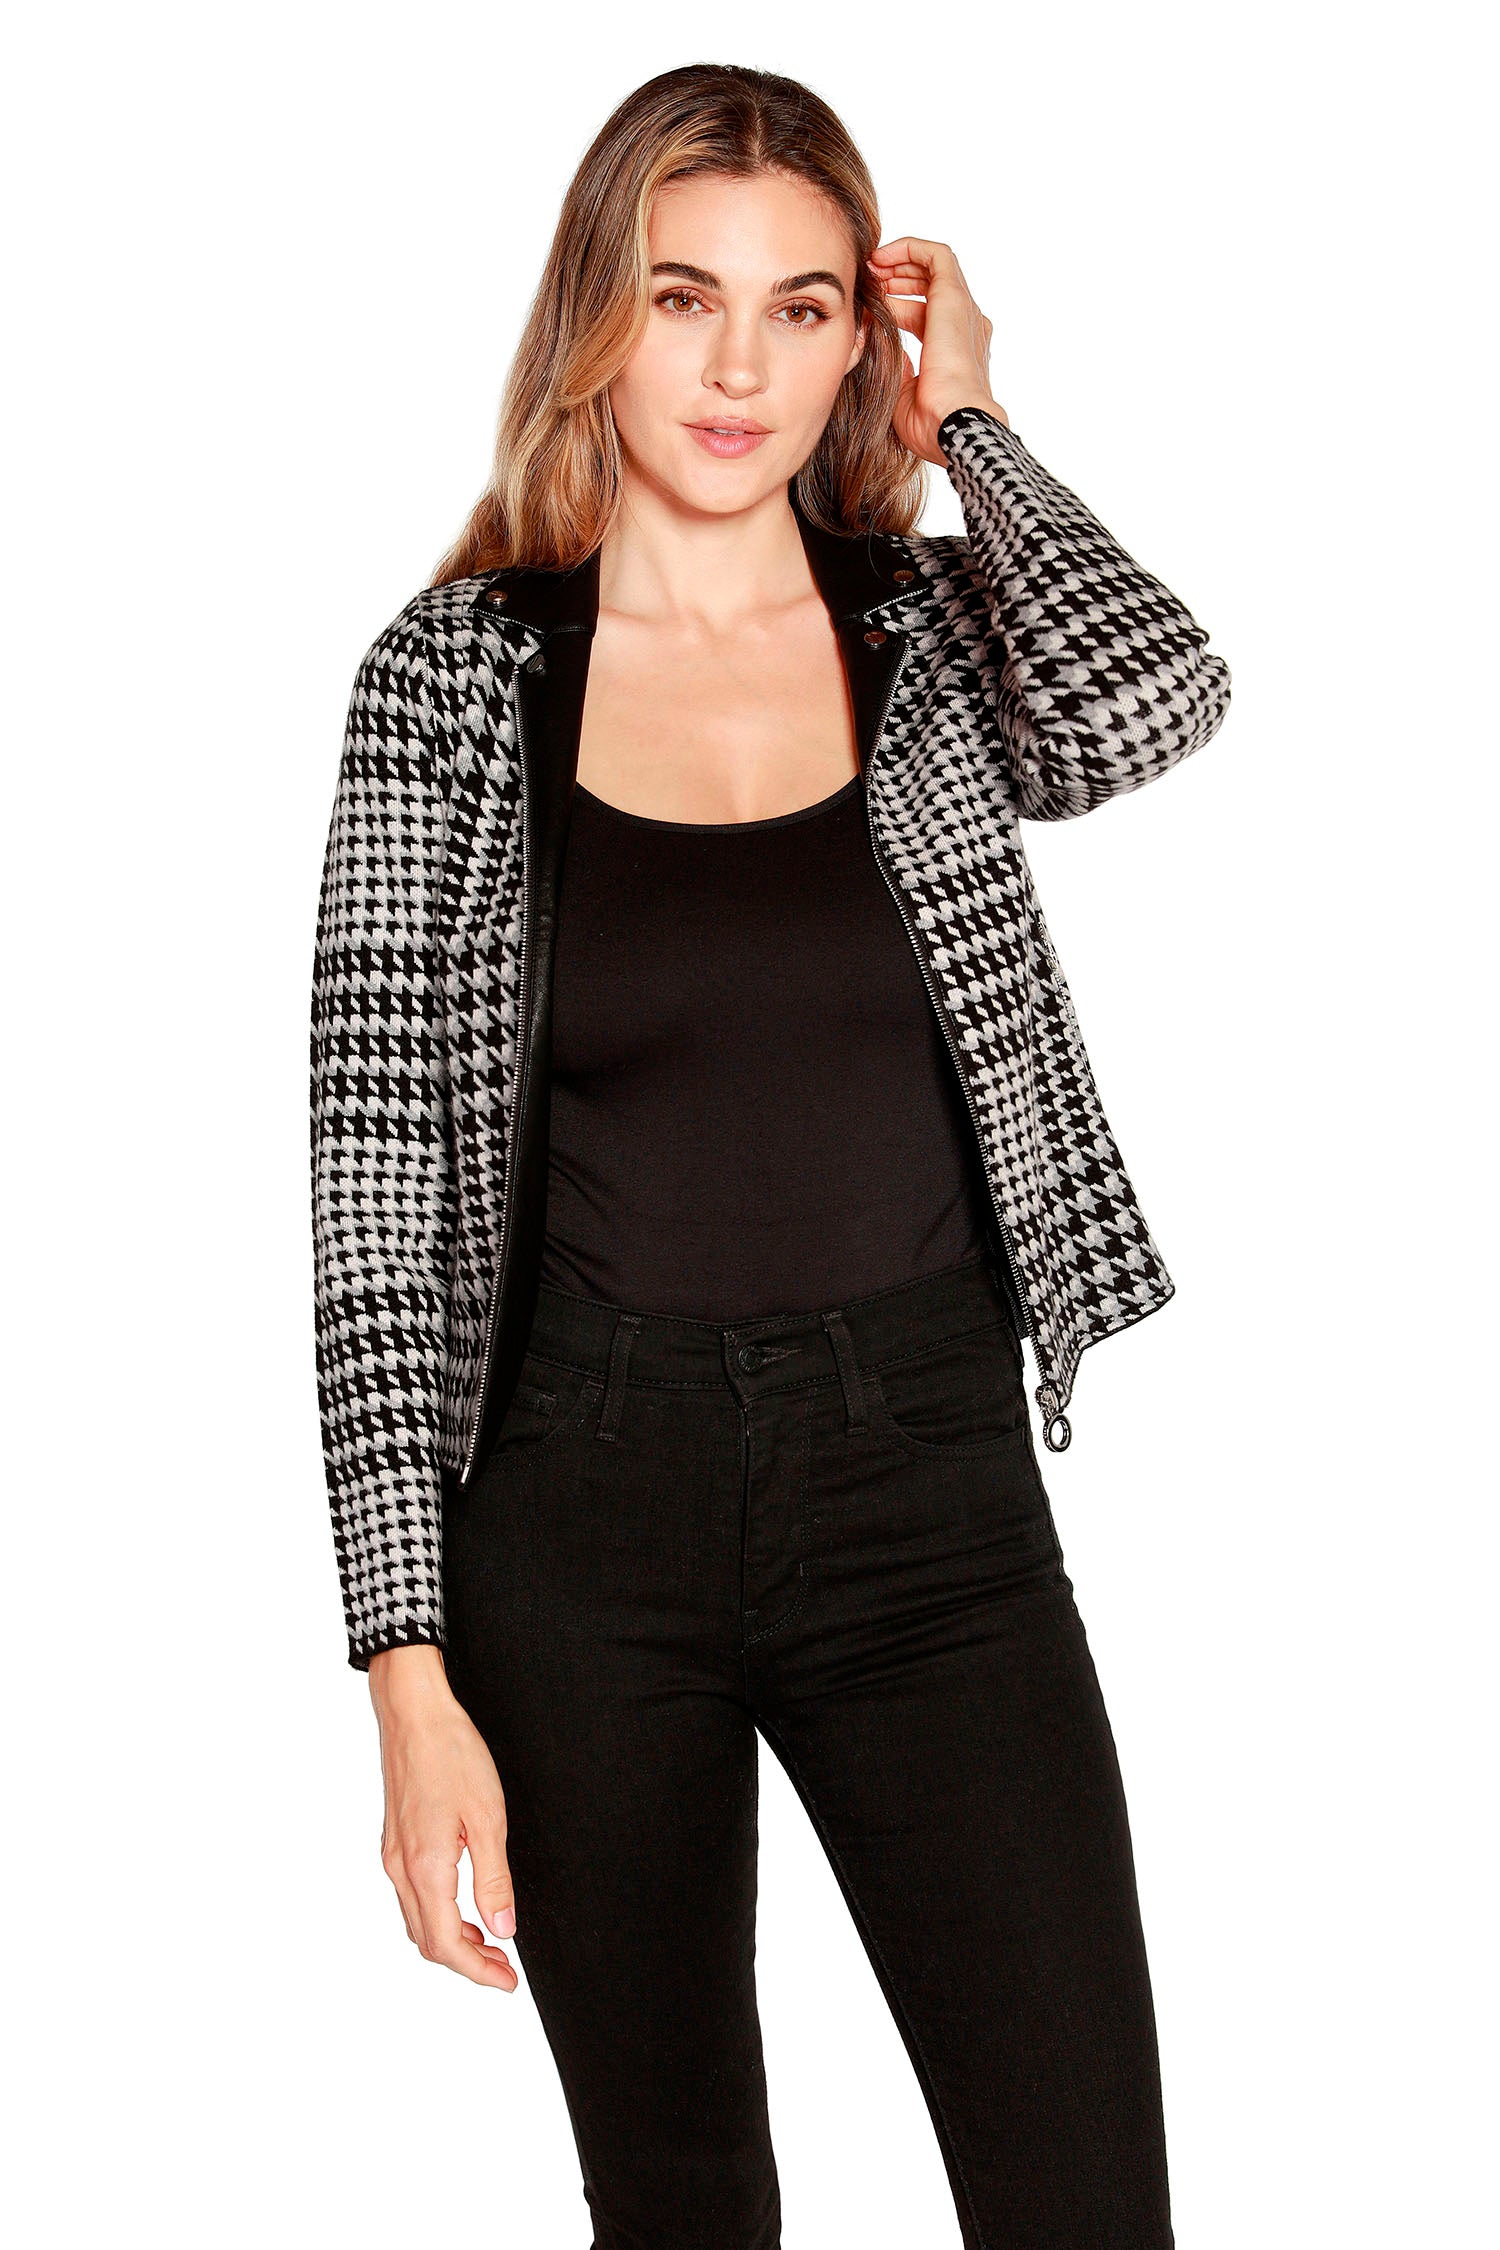 Women's Houndstooth Plaid Moto Style Jacket with Pockets and Custom Hardware